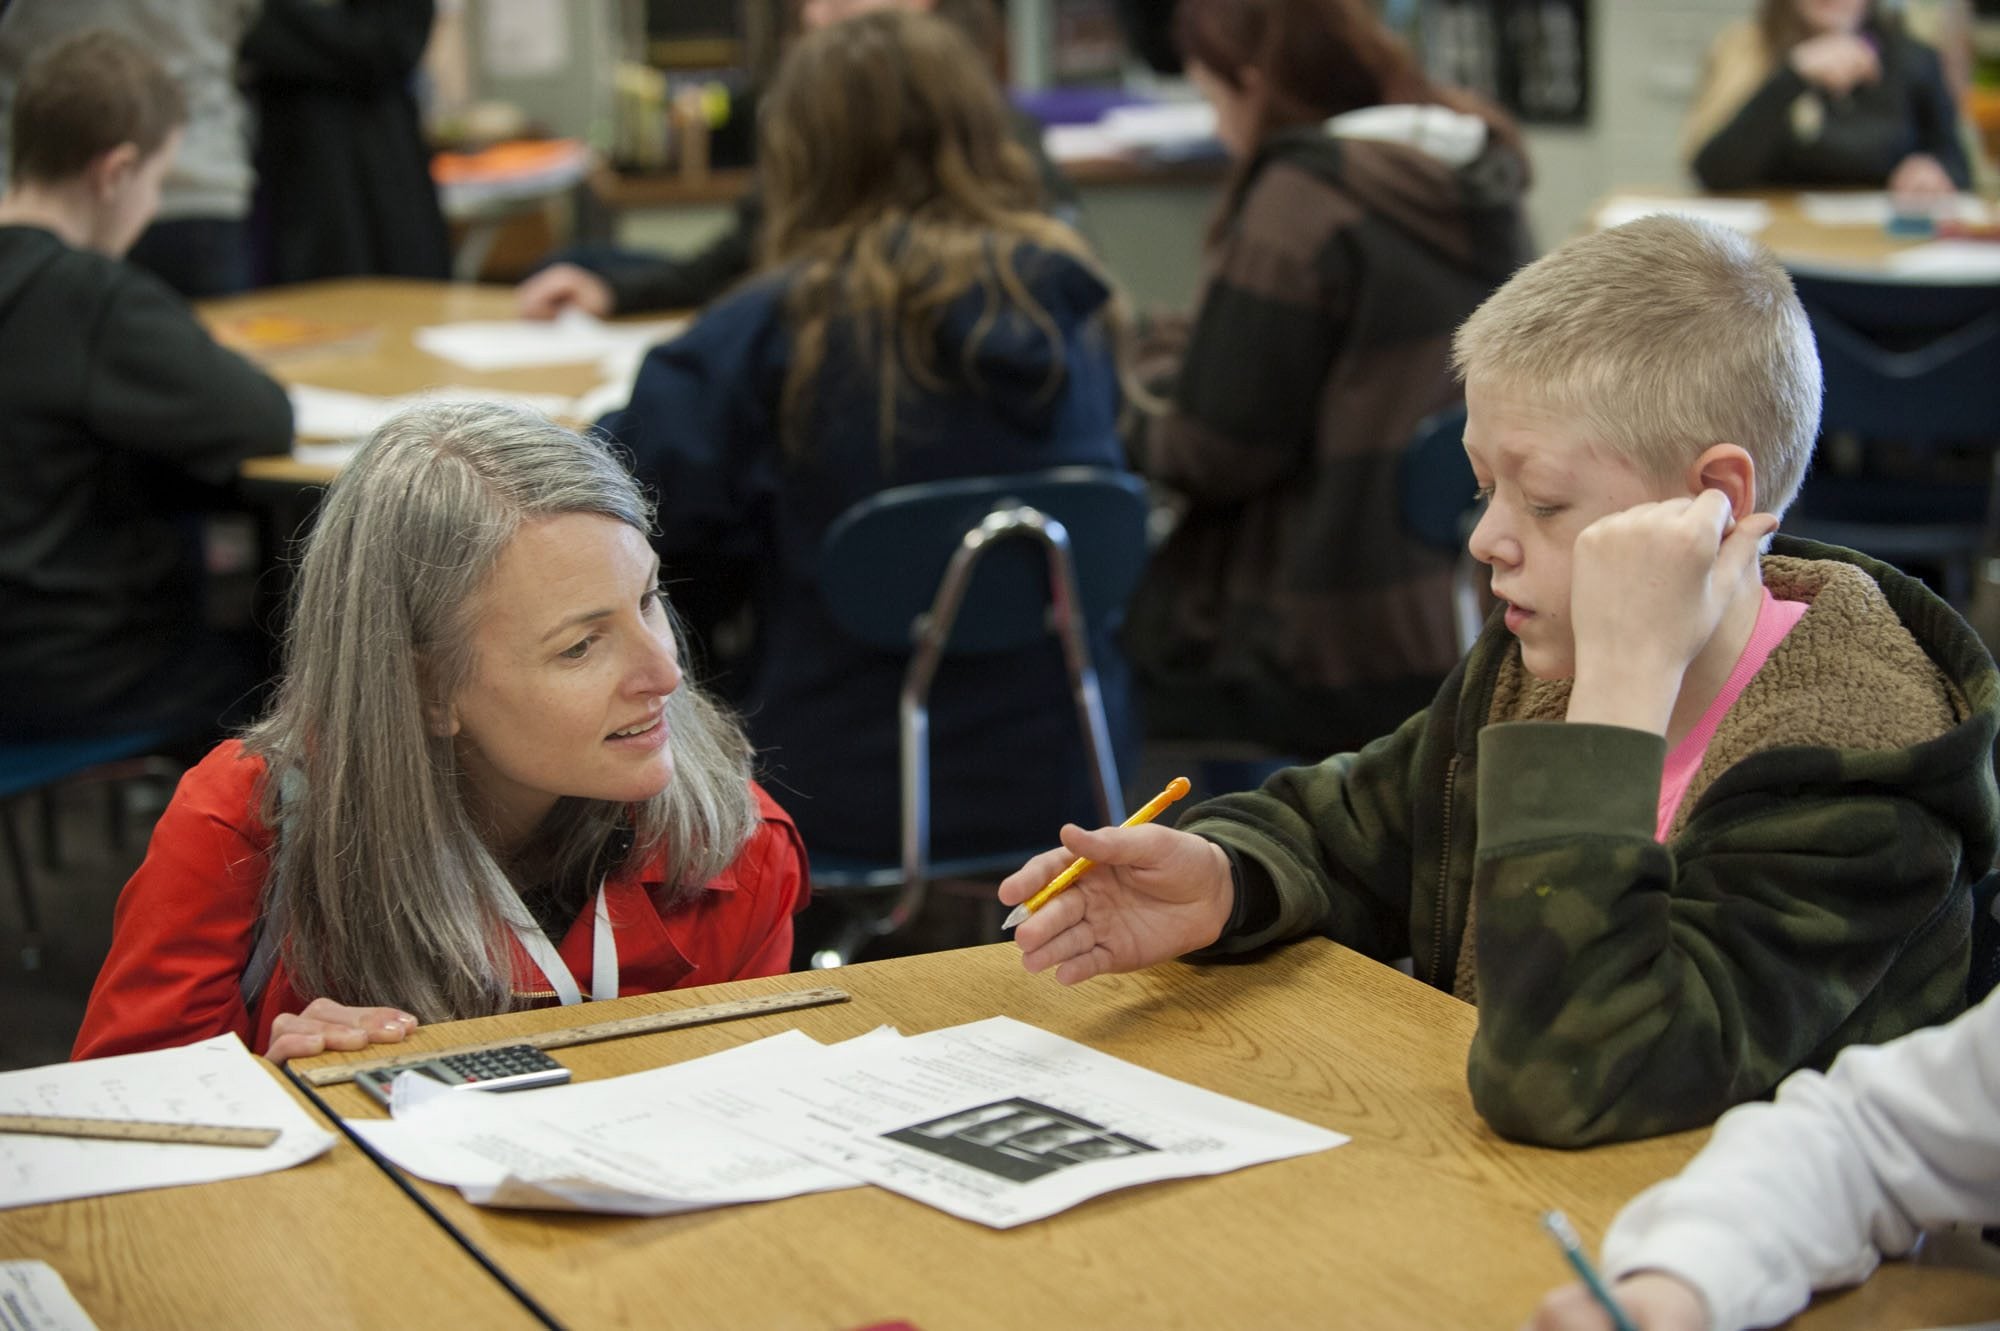 Caroline King, left, chief policy officer for Washington STEM, chats with sixth-grader Hayden Kahler, 11, about calculating the ratios of caffeine to sugar in coffee drinks during his math class Wednesday at Frontier Middle School.